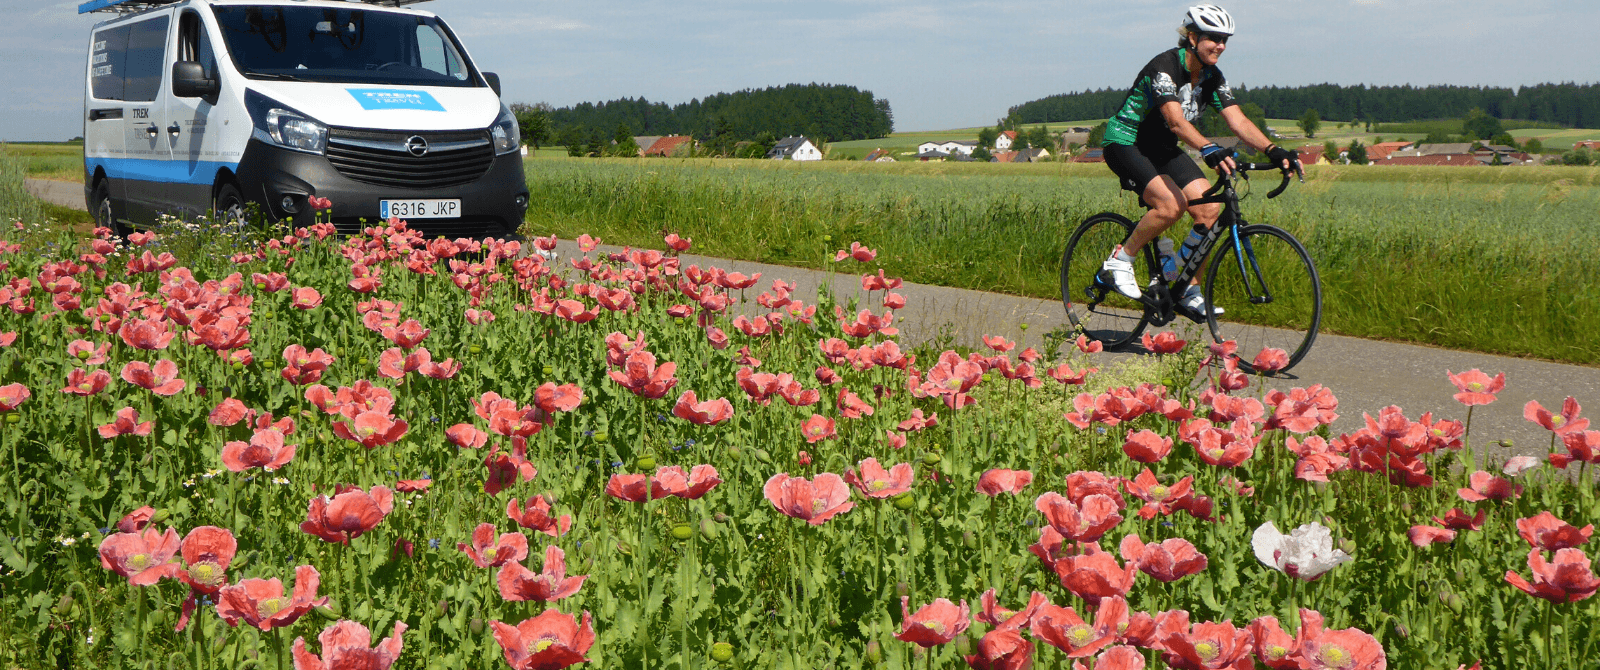 person riding their bike on a paved road lined with pink flowers